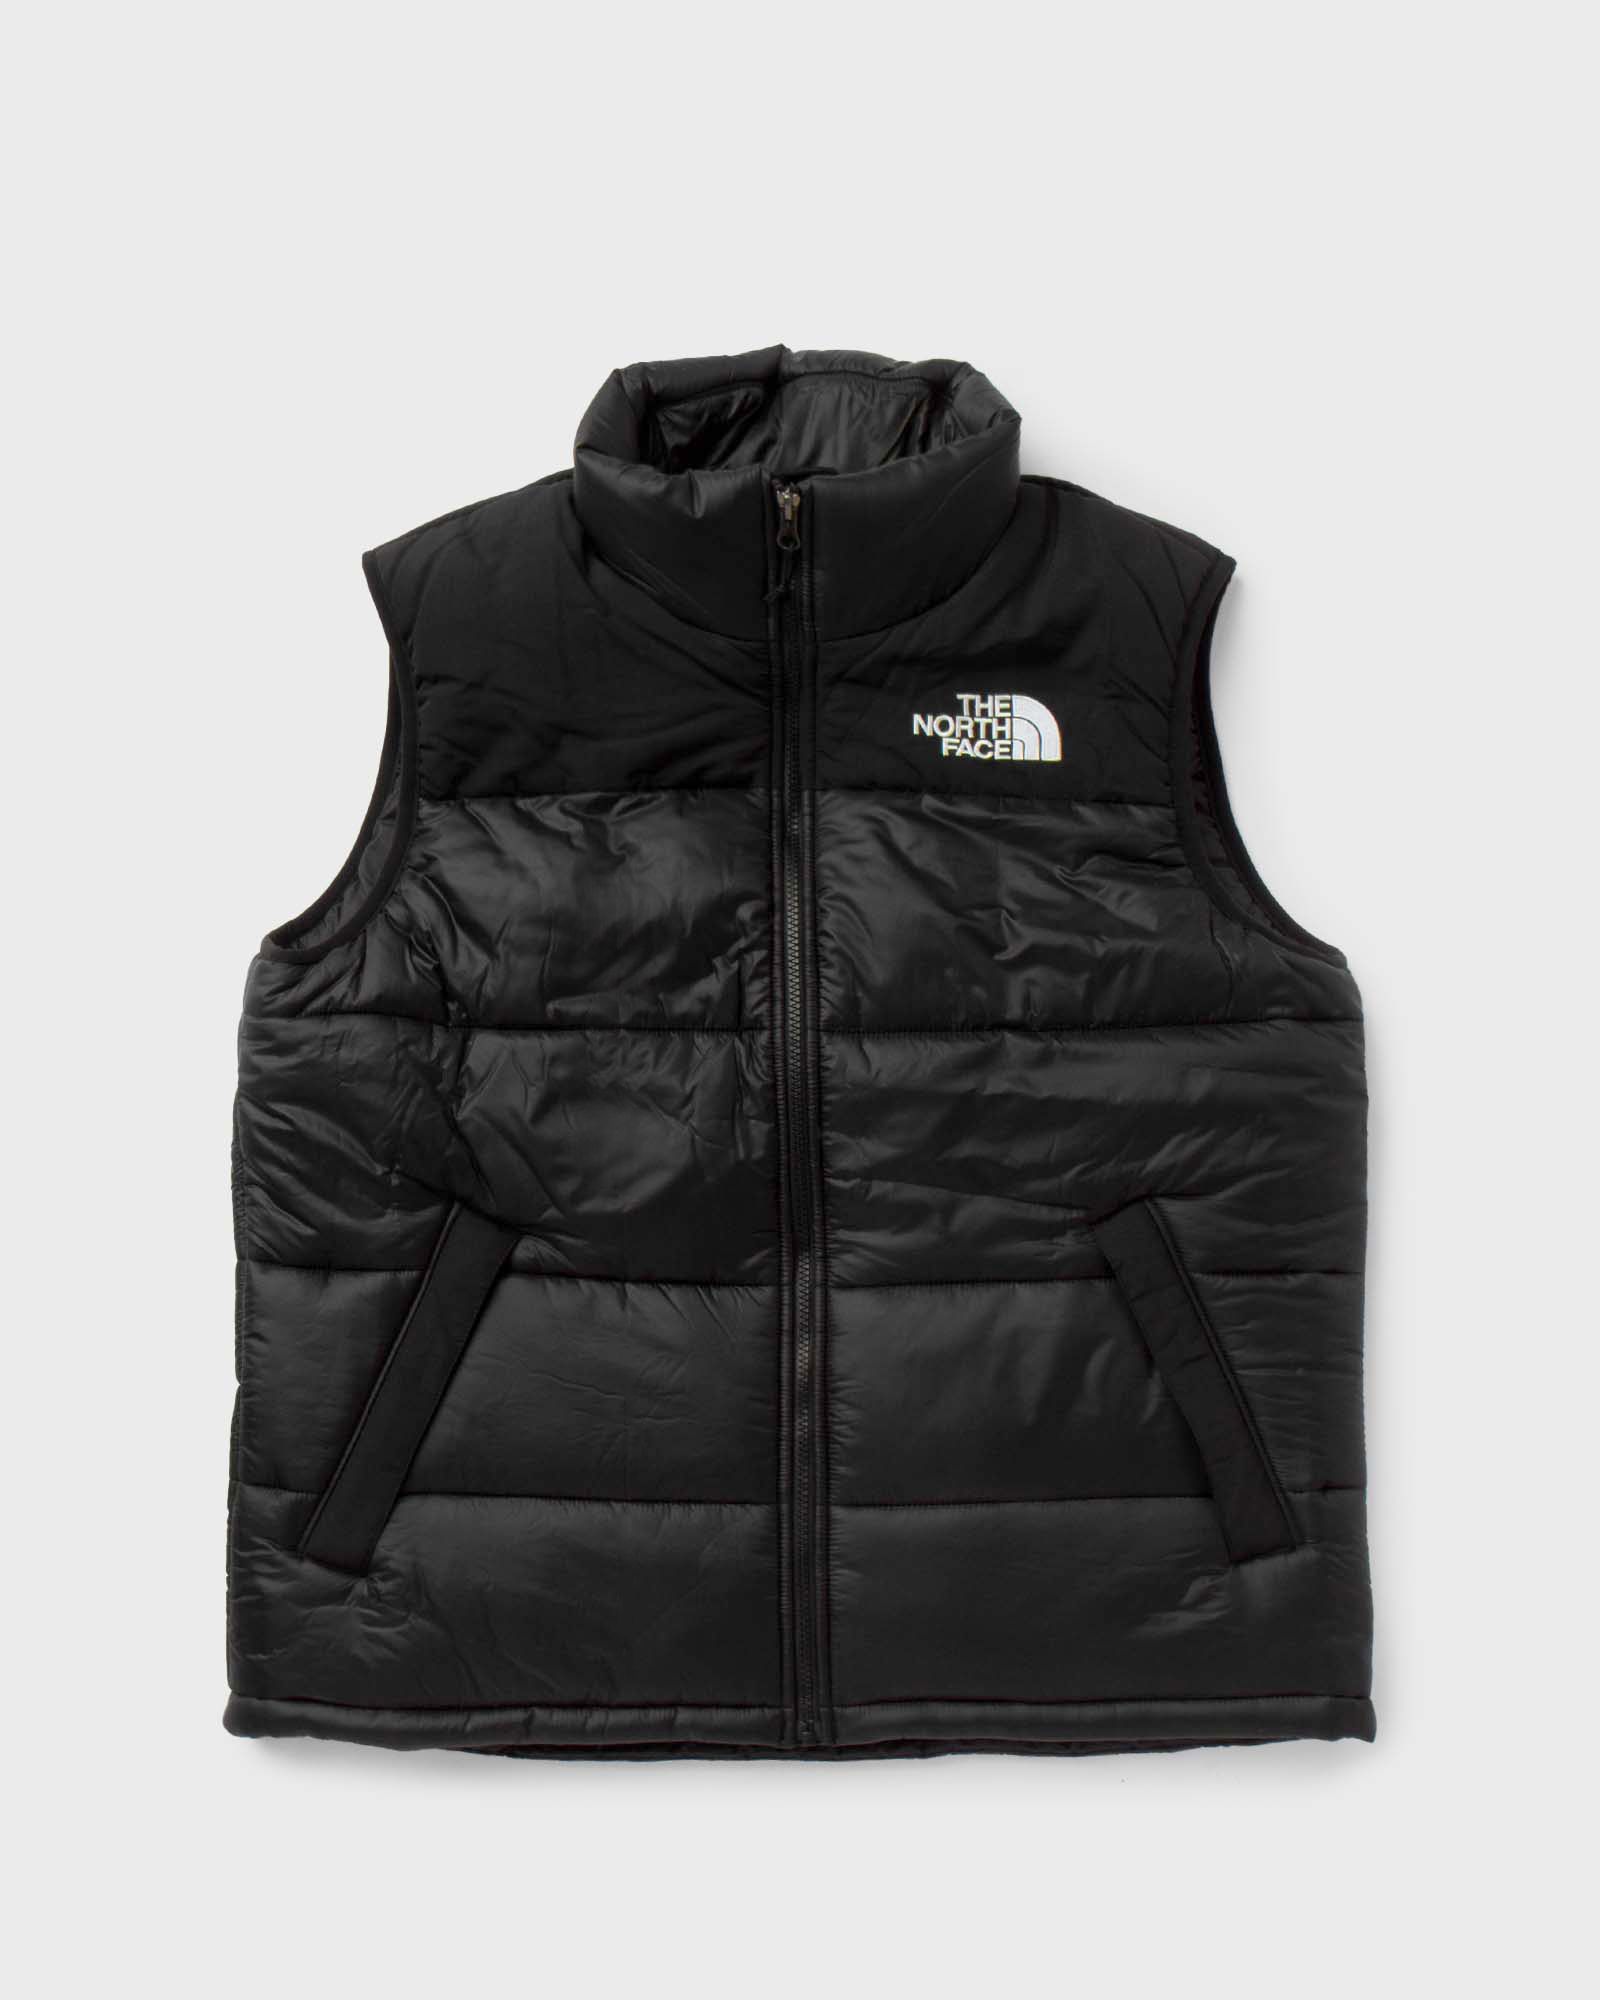 The North Face HIMALAYAN INSULATED VEST men Vests black in Größe:XXL von The North Face